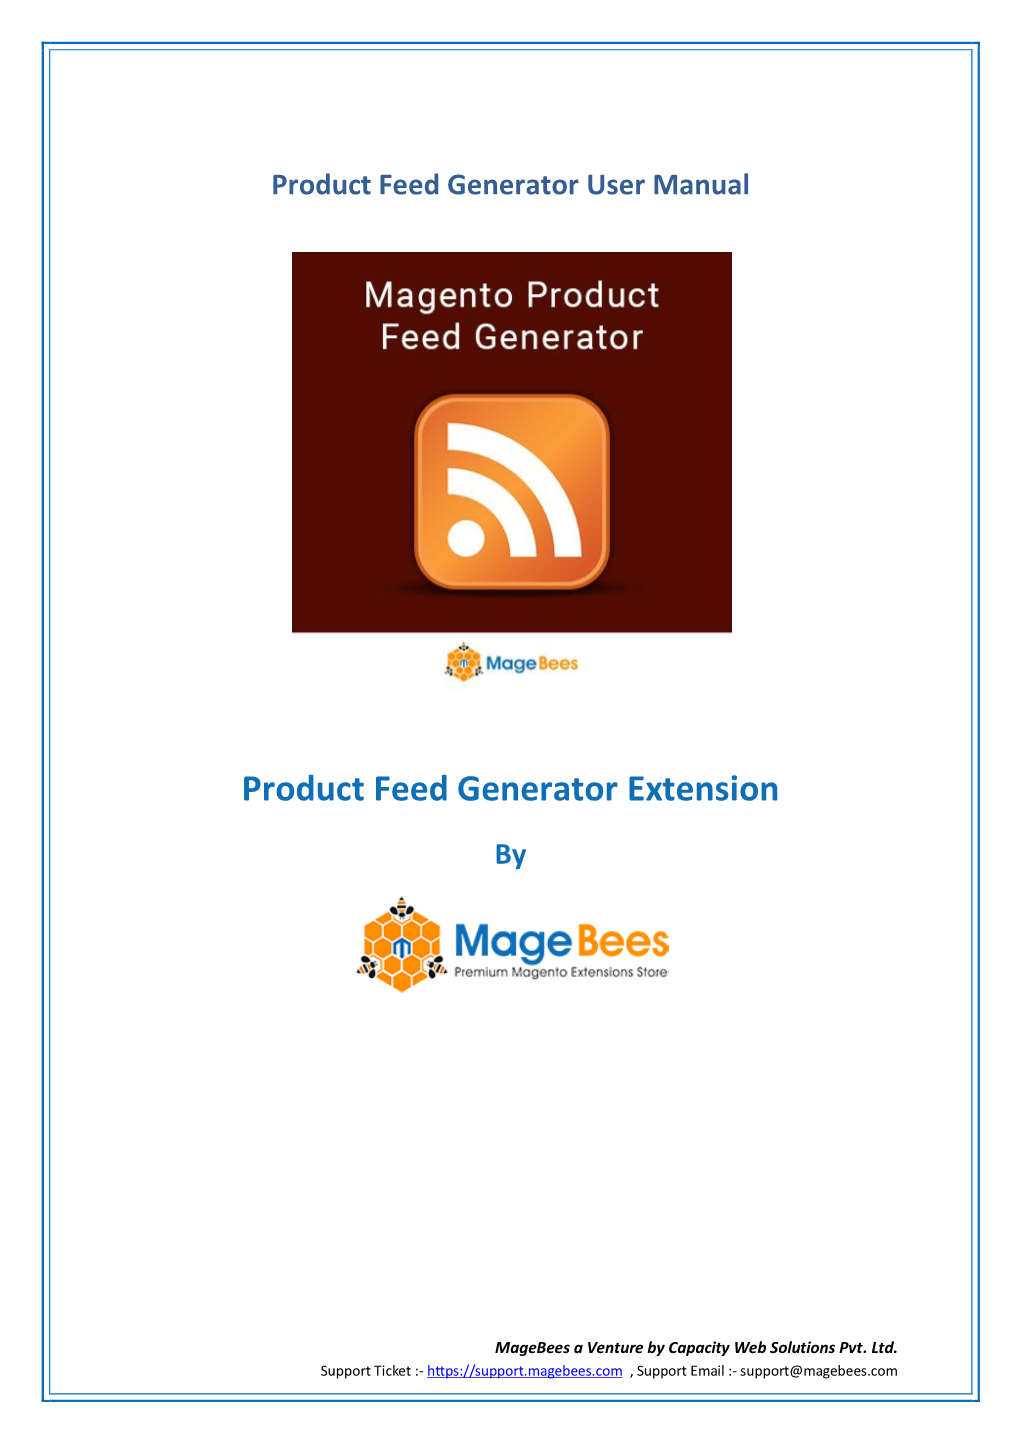 Product Feed Generator Extension by Magebees